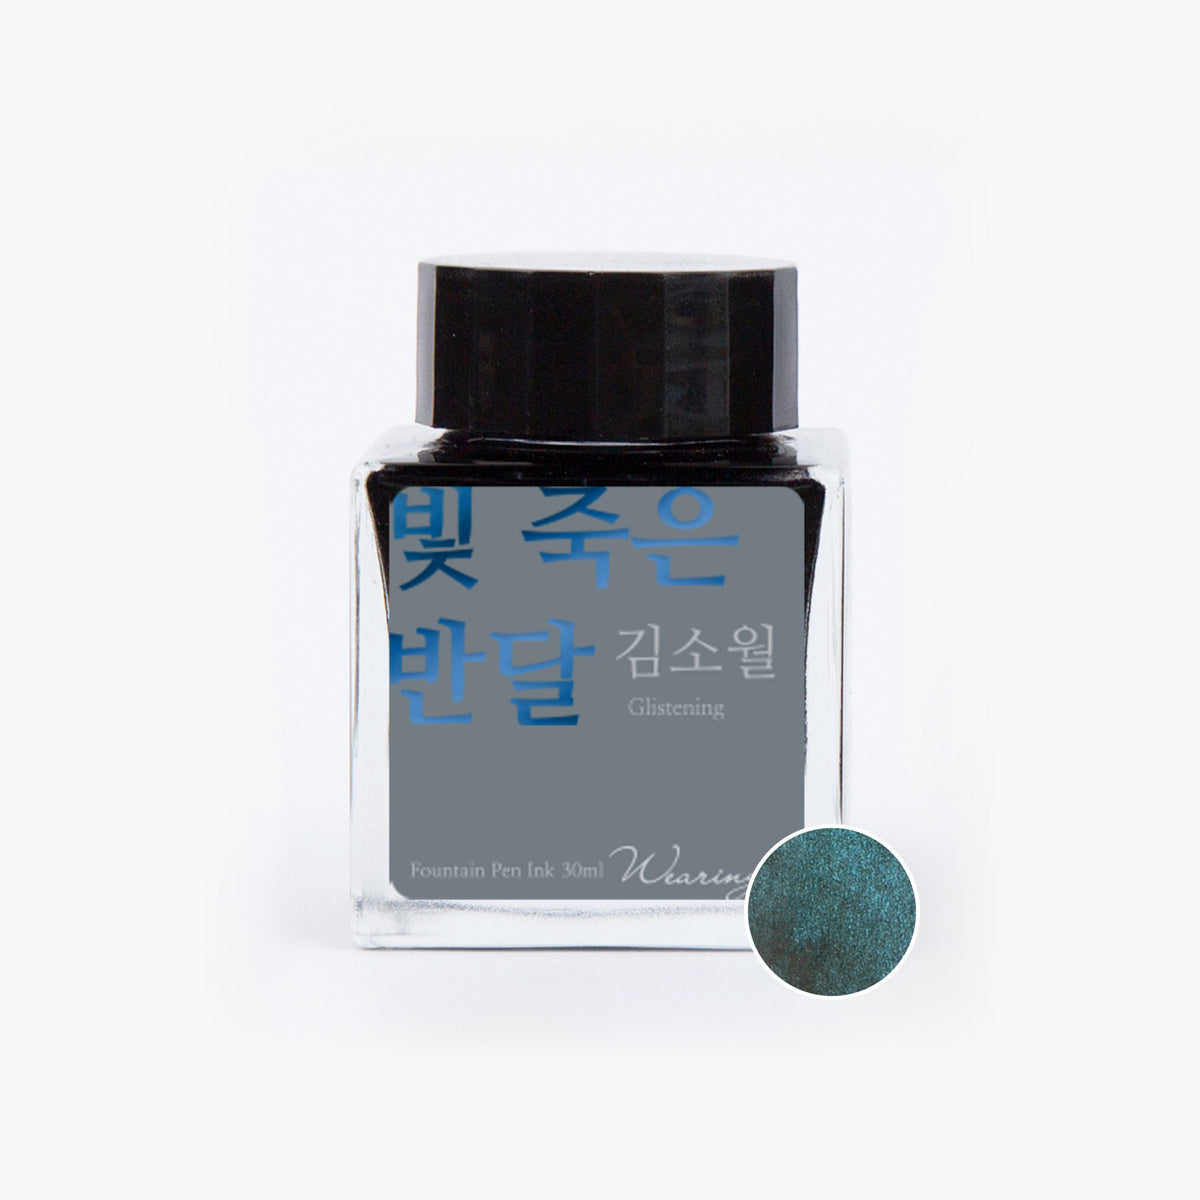 Wearingeul - Fountain Pen Ink - Half Moon with Dimmed Light (Shimmer)